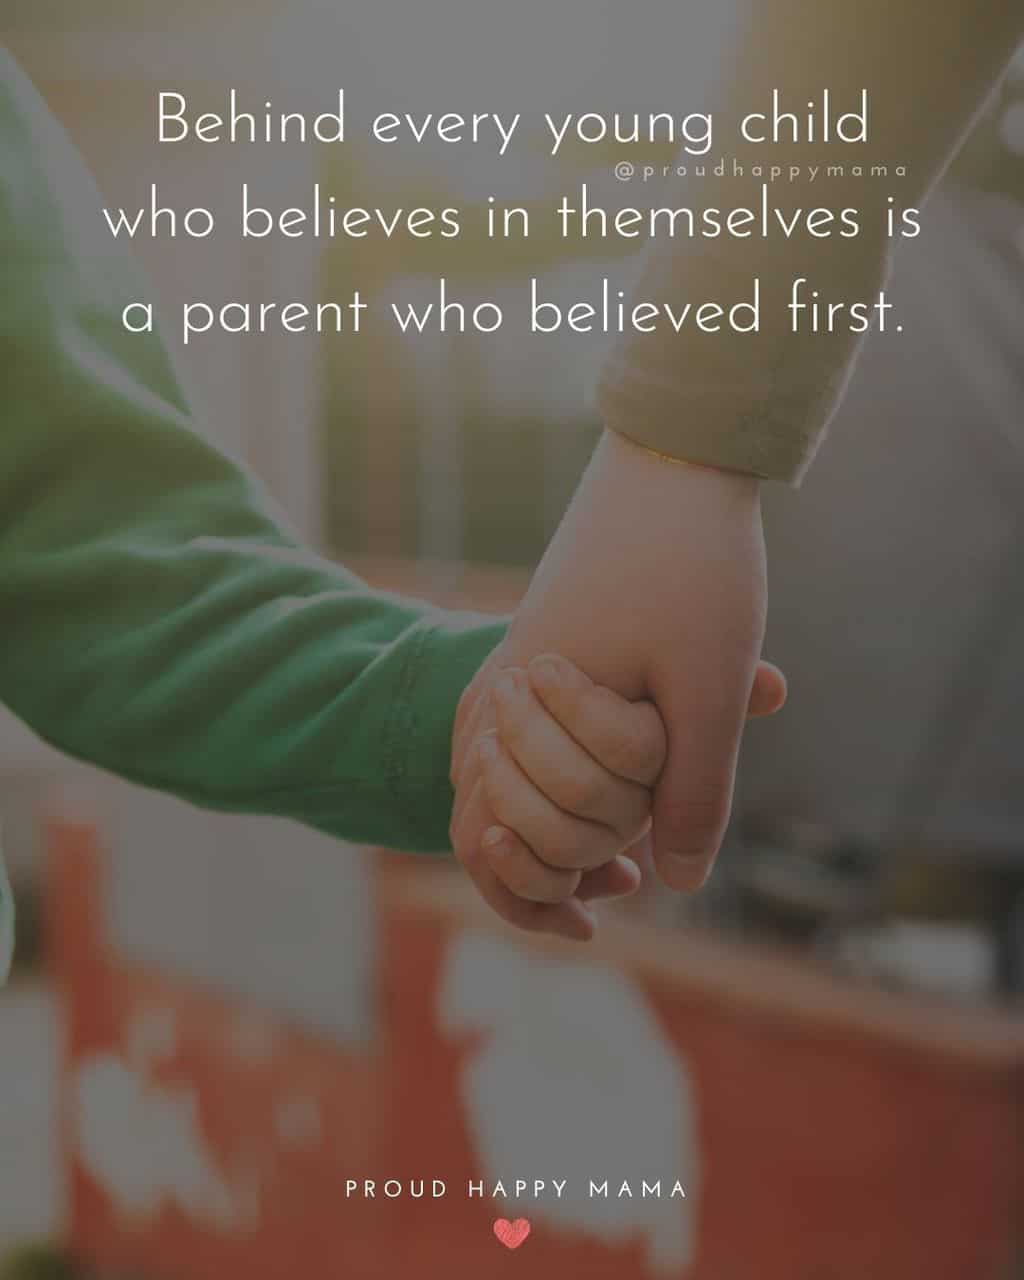 Parenting Quotes - Behind every young child who believes in themselves is a parent who believed first.’